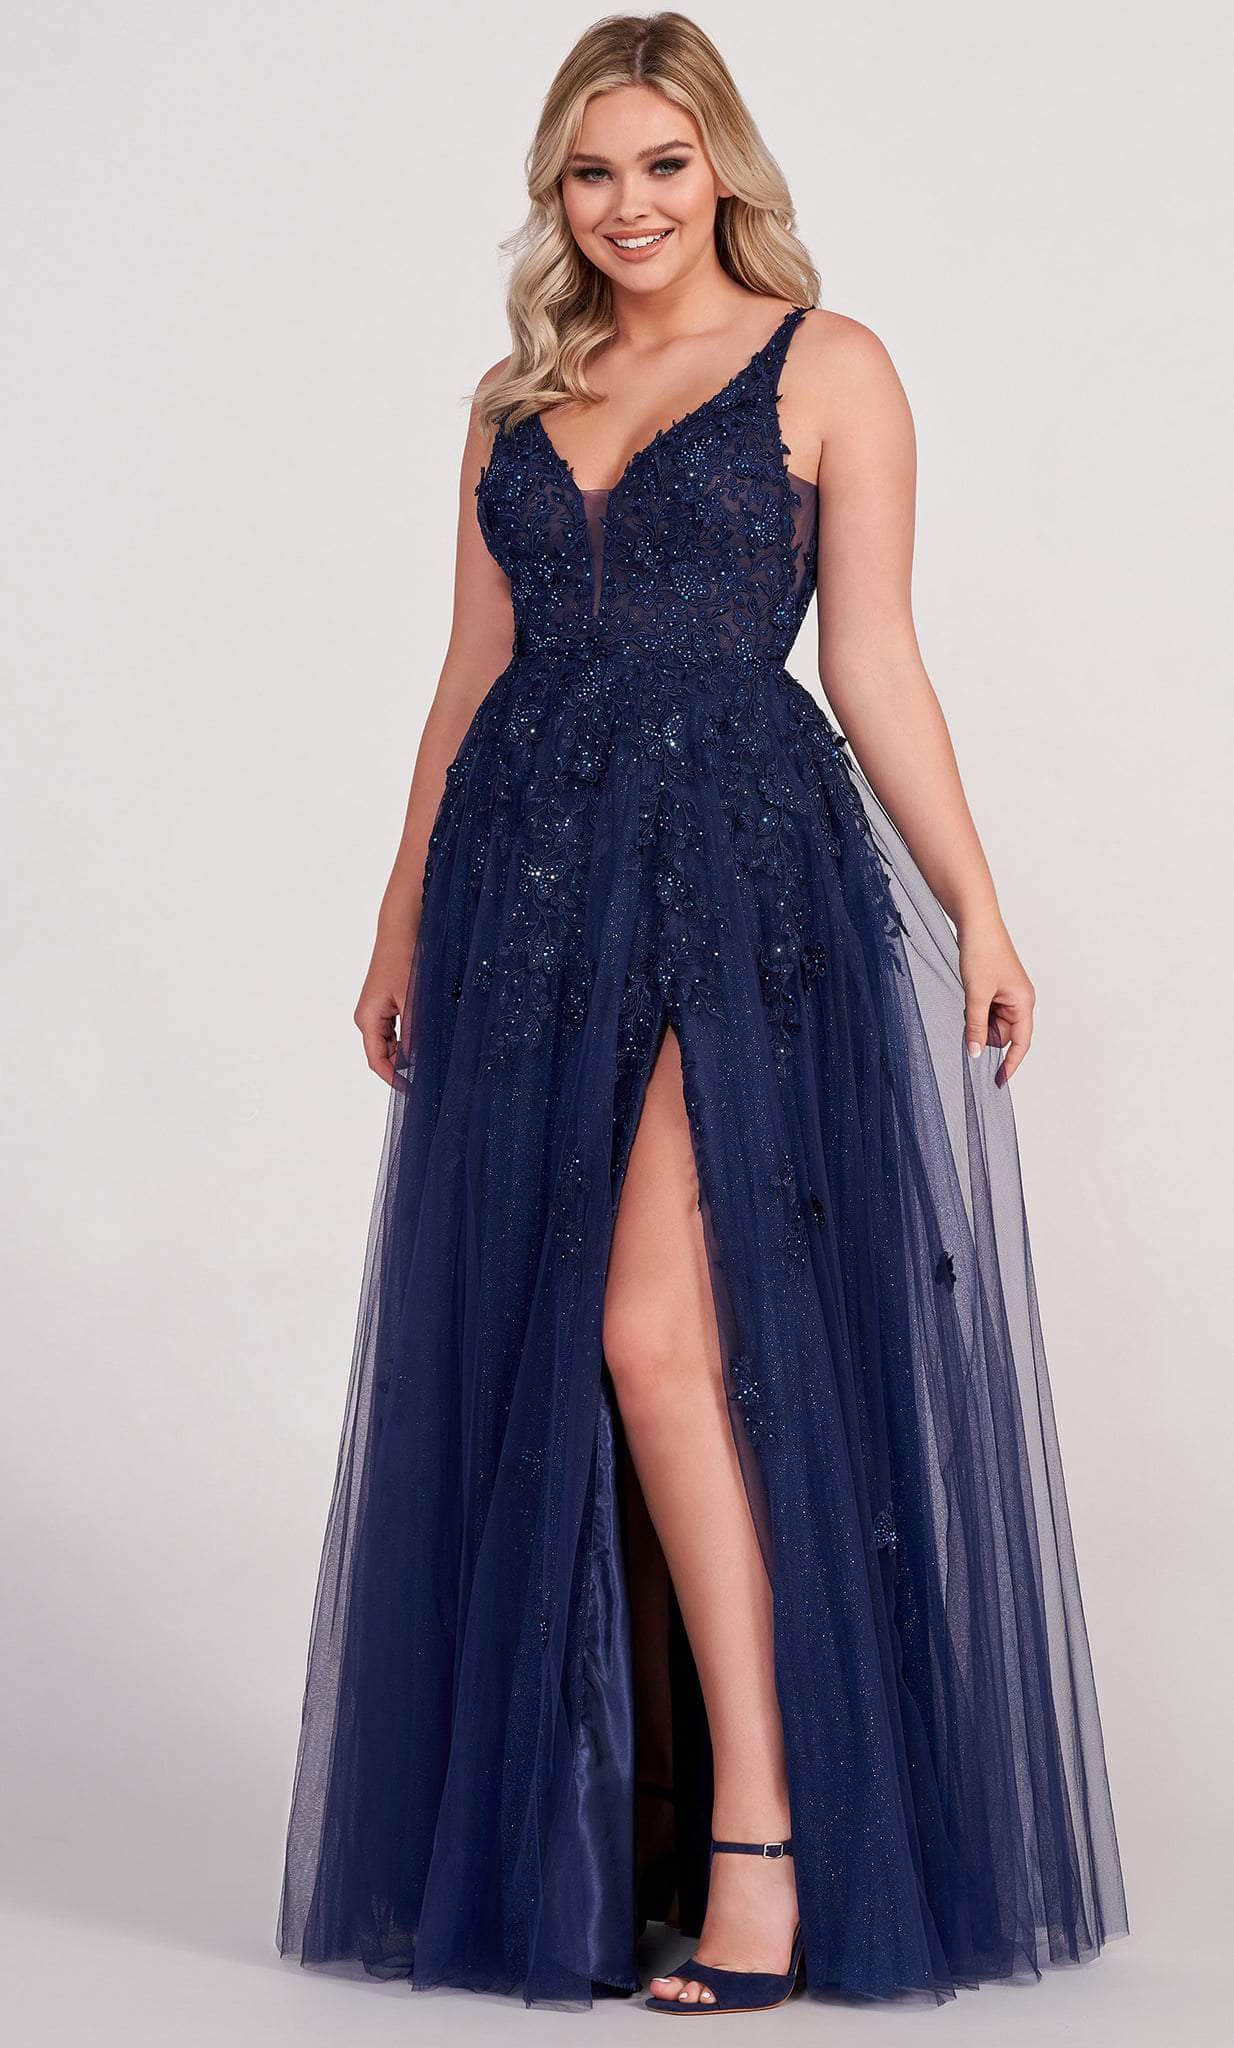 Image of Ellie Wilde EW34103 - Lace Appliqued V-Neck Prom Gown